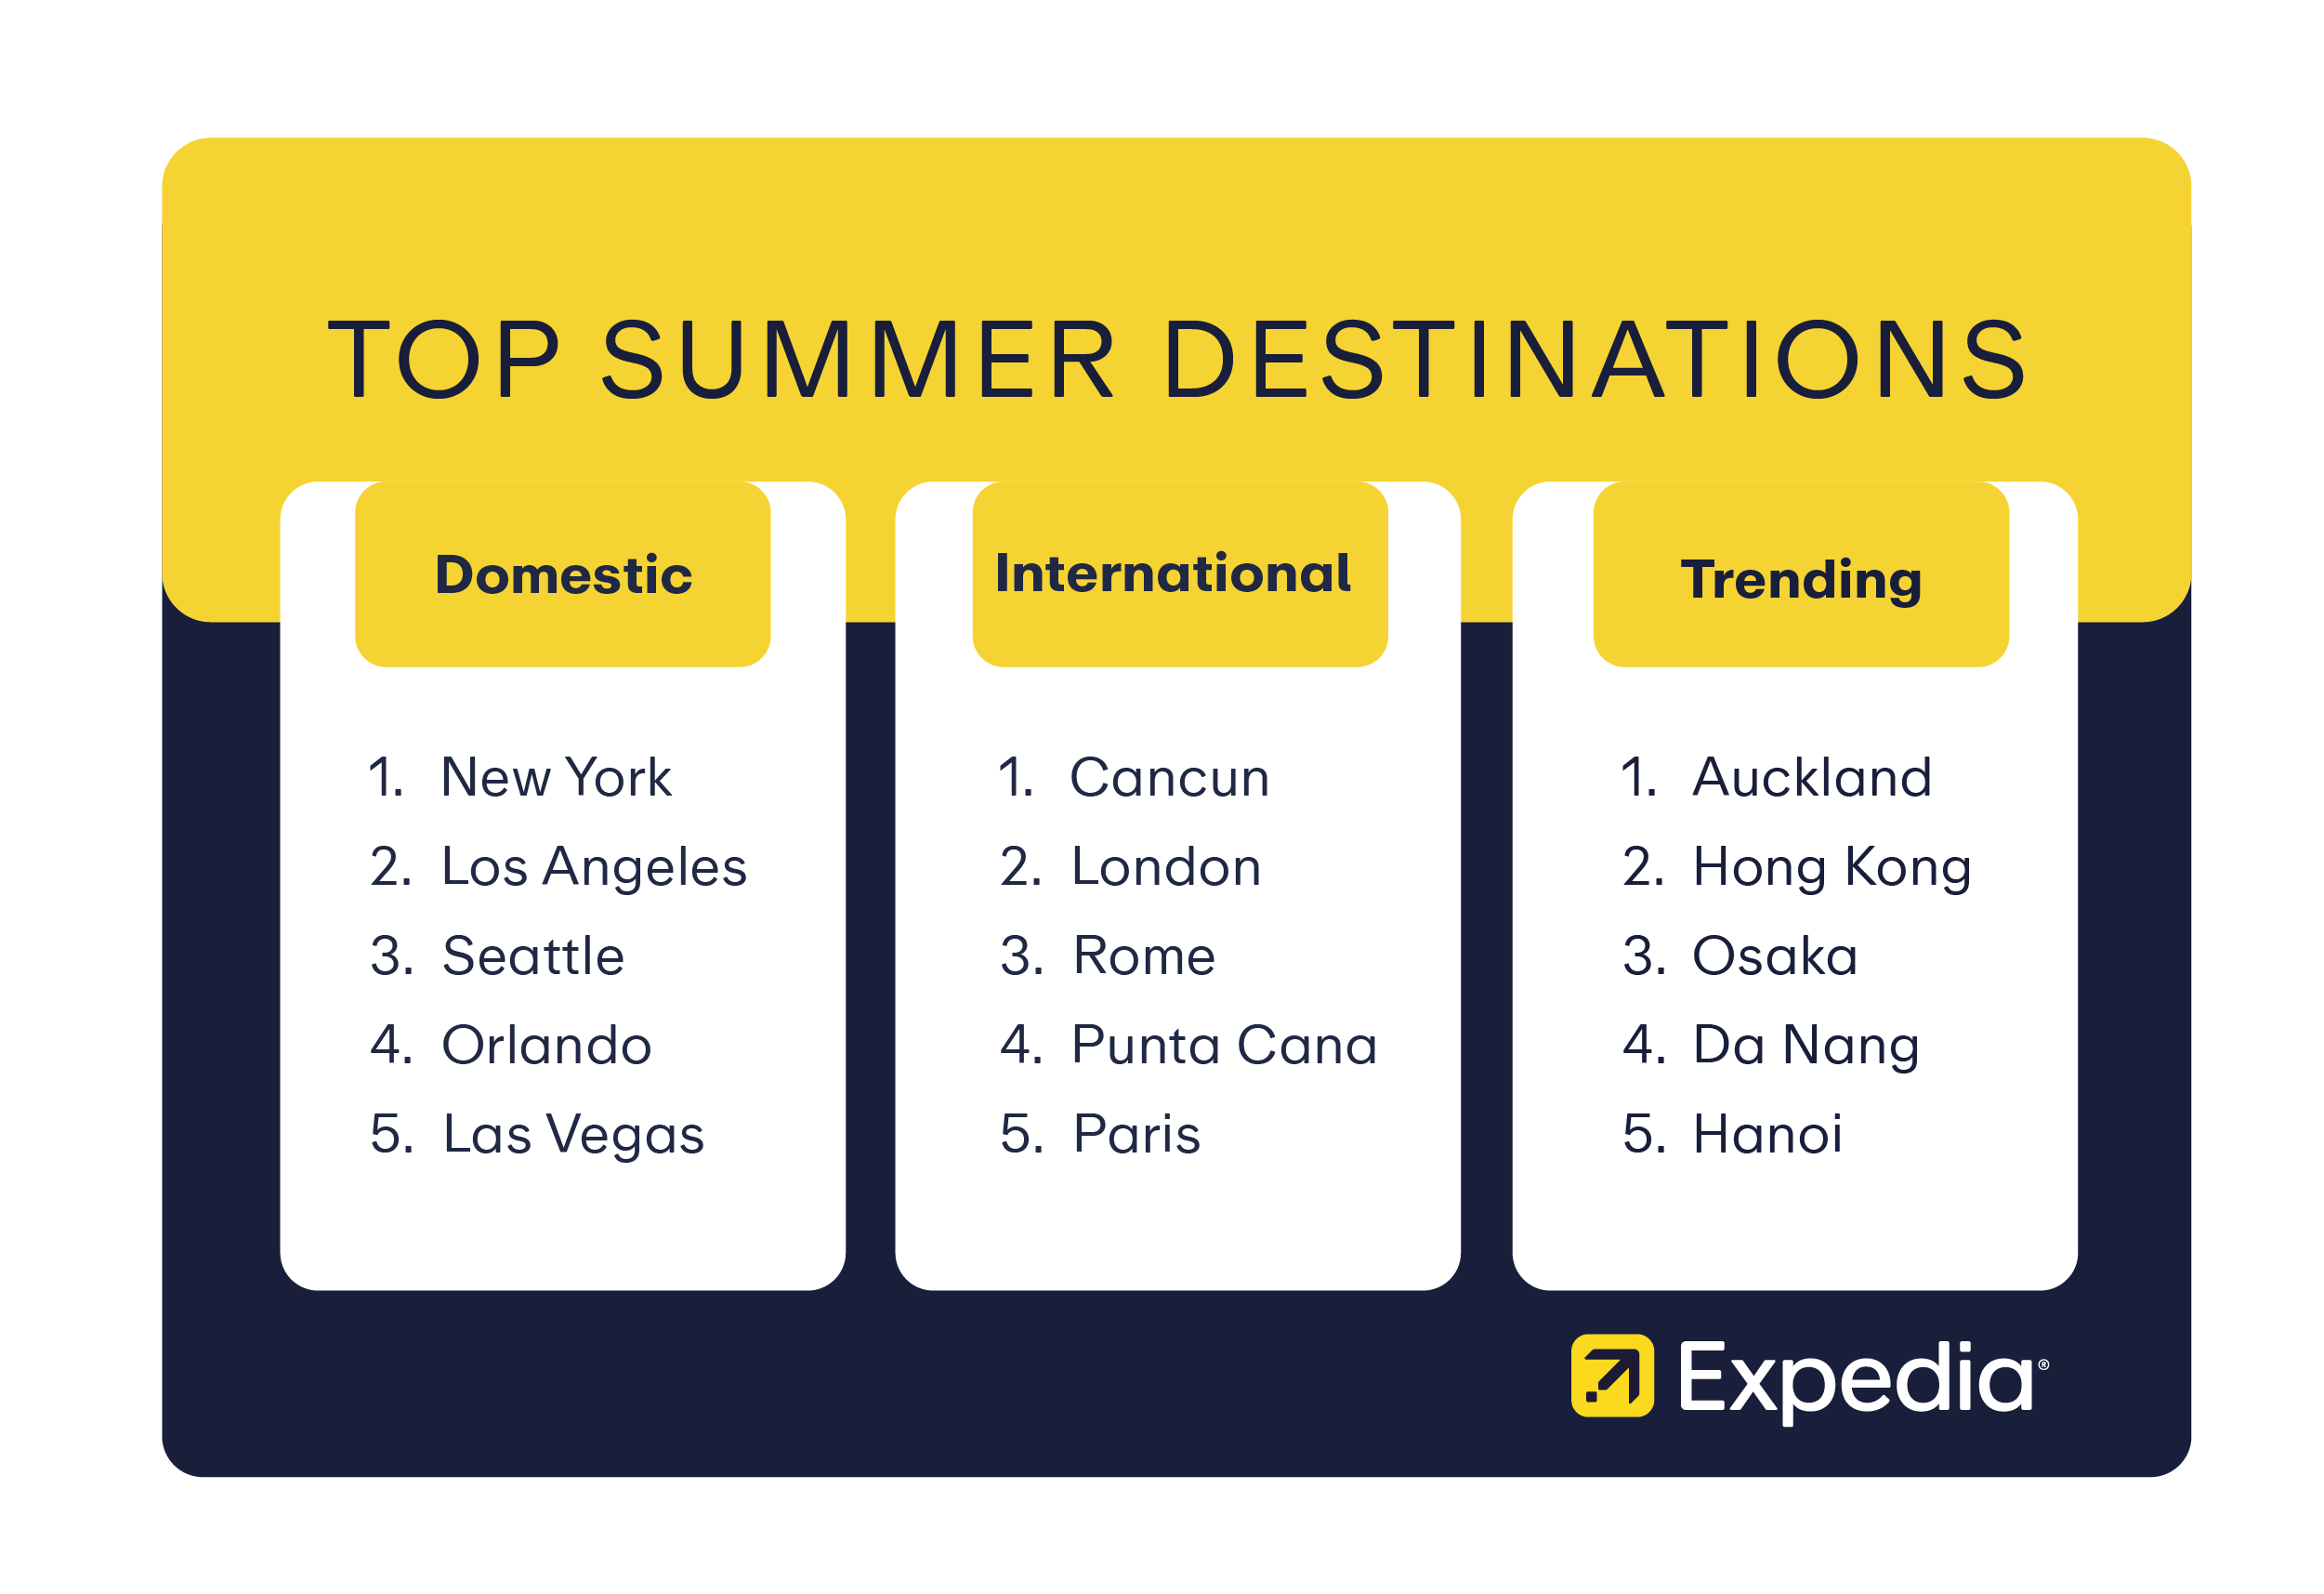 *Based on Expedia flight demand as of April 1, 2023, for travel during June to August